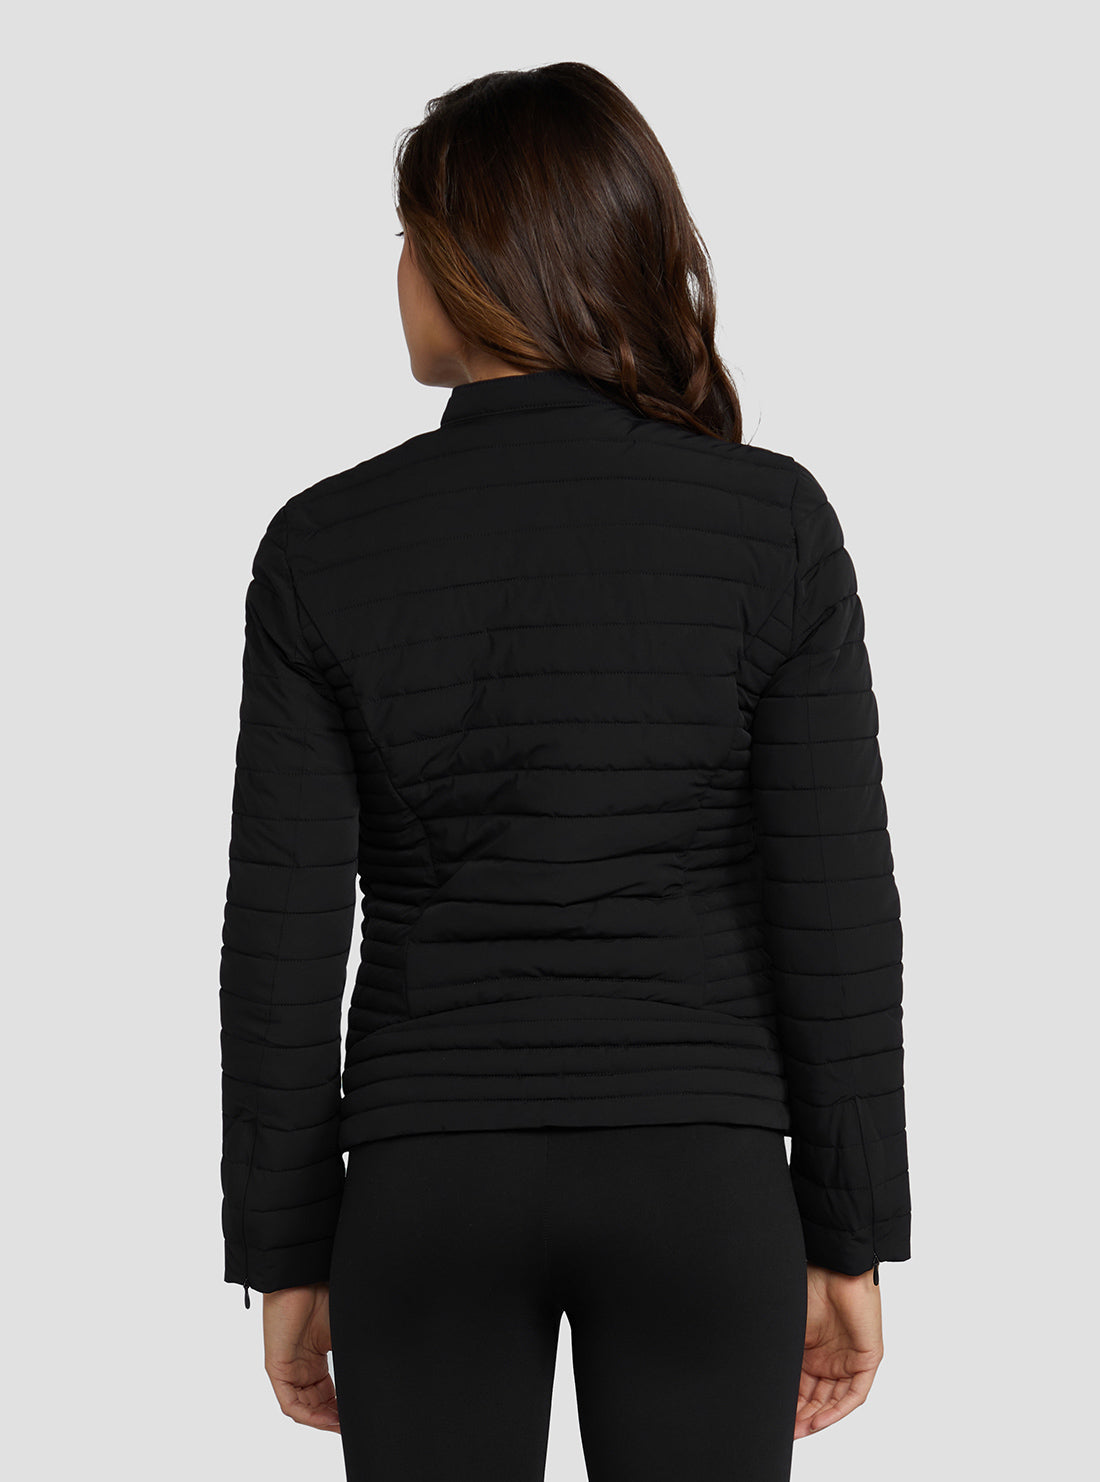 GUESS Women's Eco Black Vona Jacket W2YL1IW6NW2 Back View